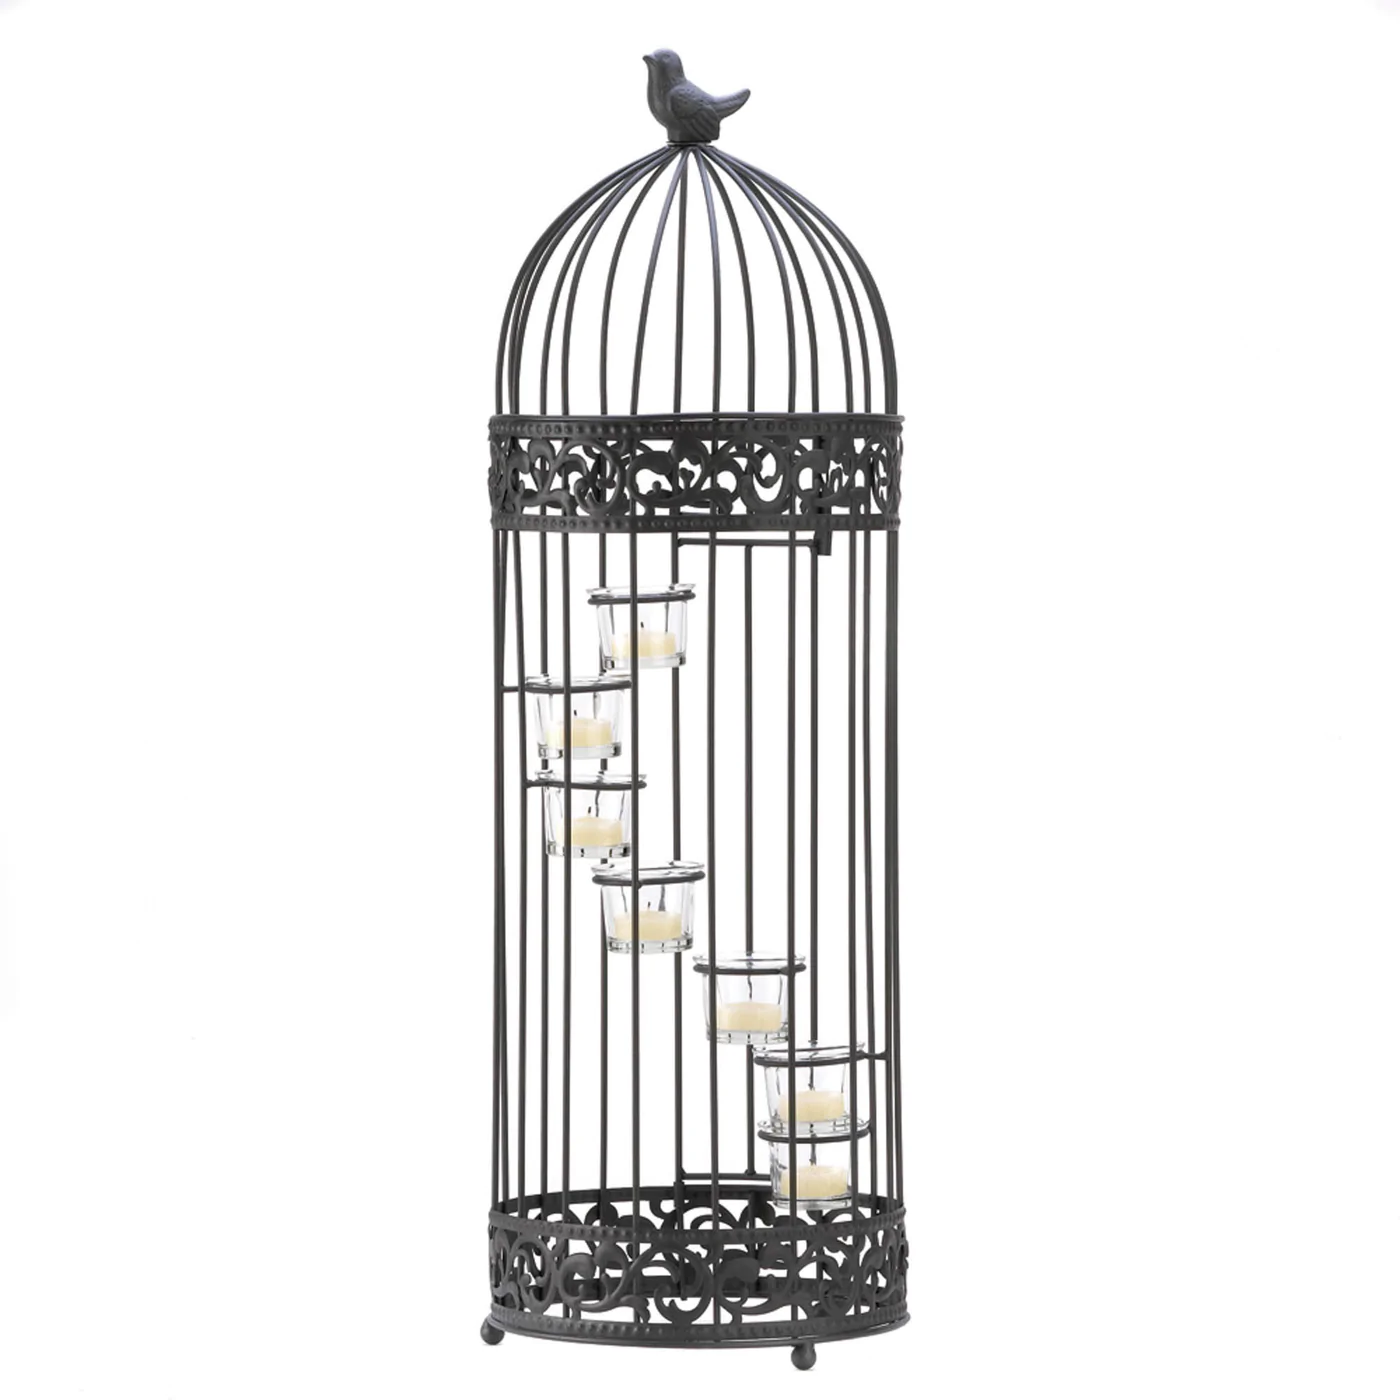 Birdcage Staircase Candle Stand - $42.00